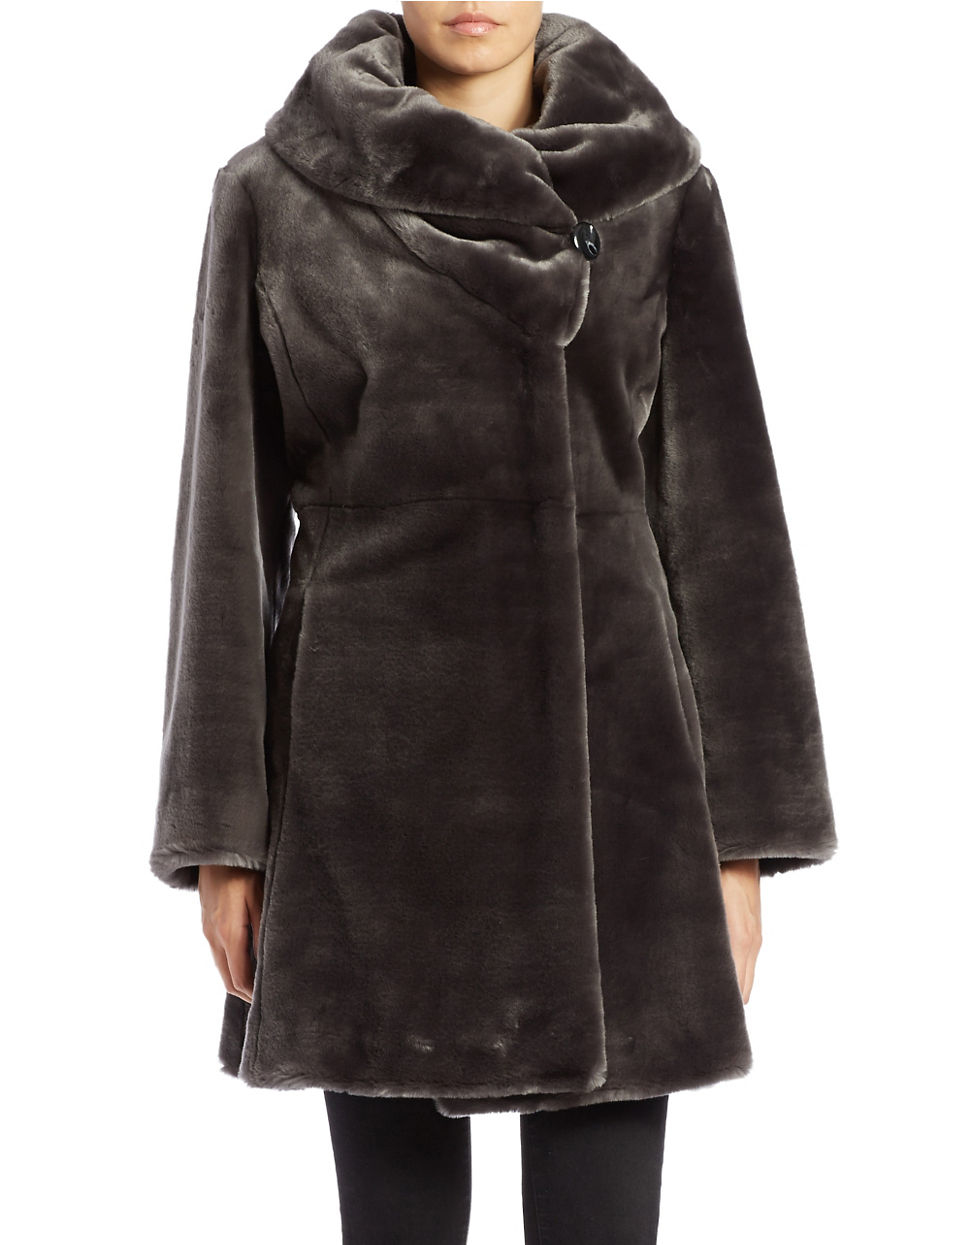 Lyst - Gallery Fitted Faux Fur Coat in Gray